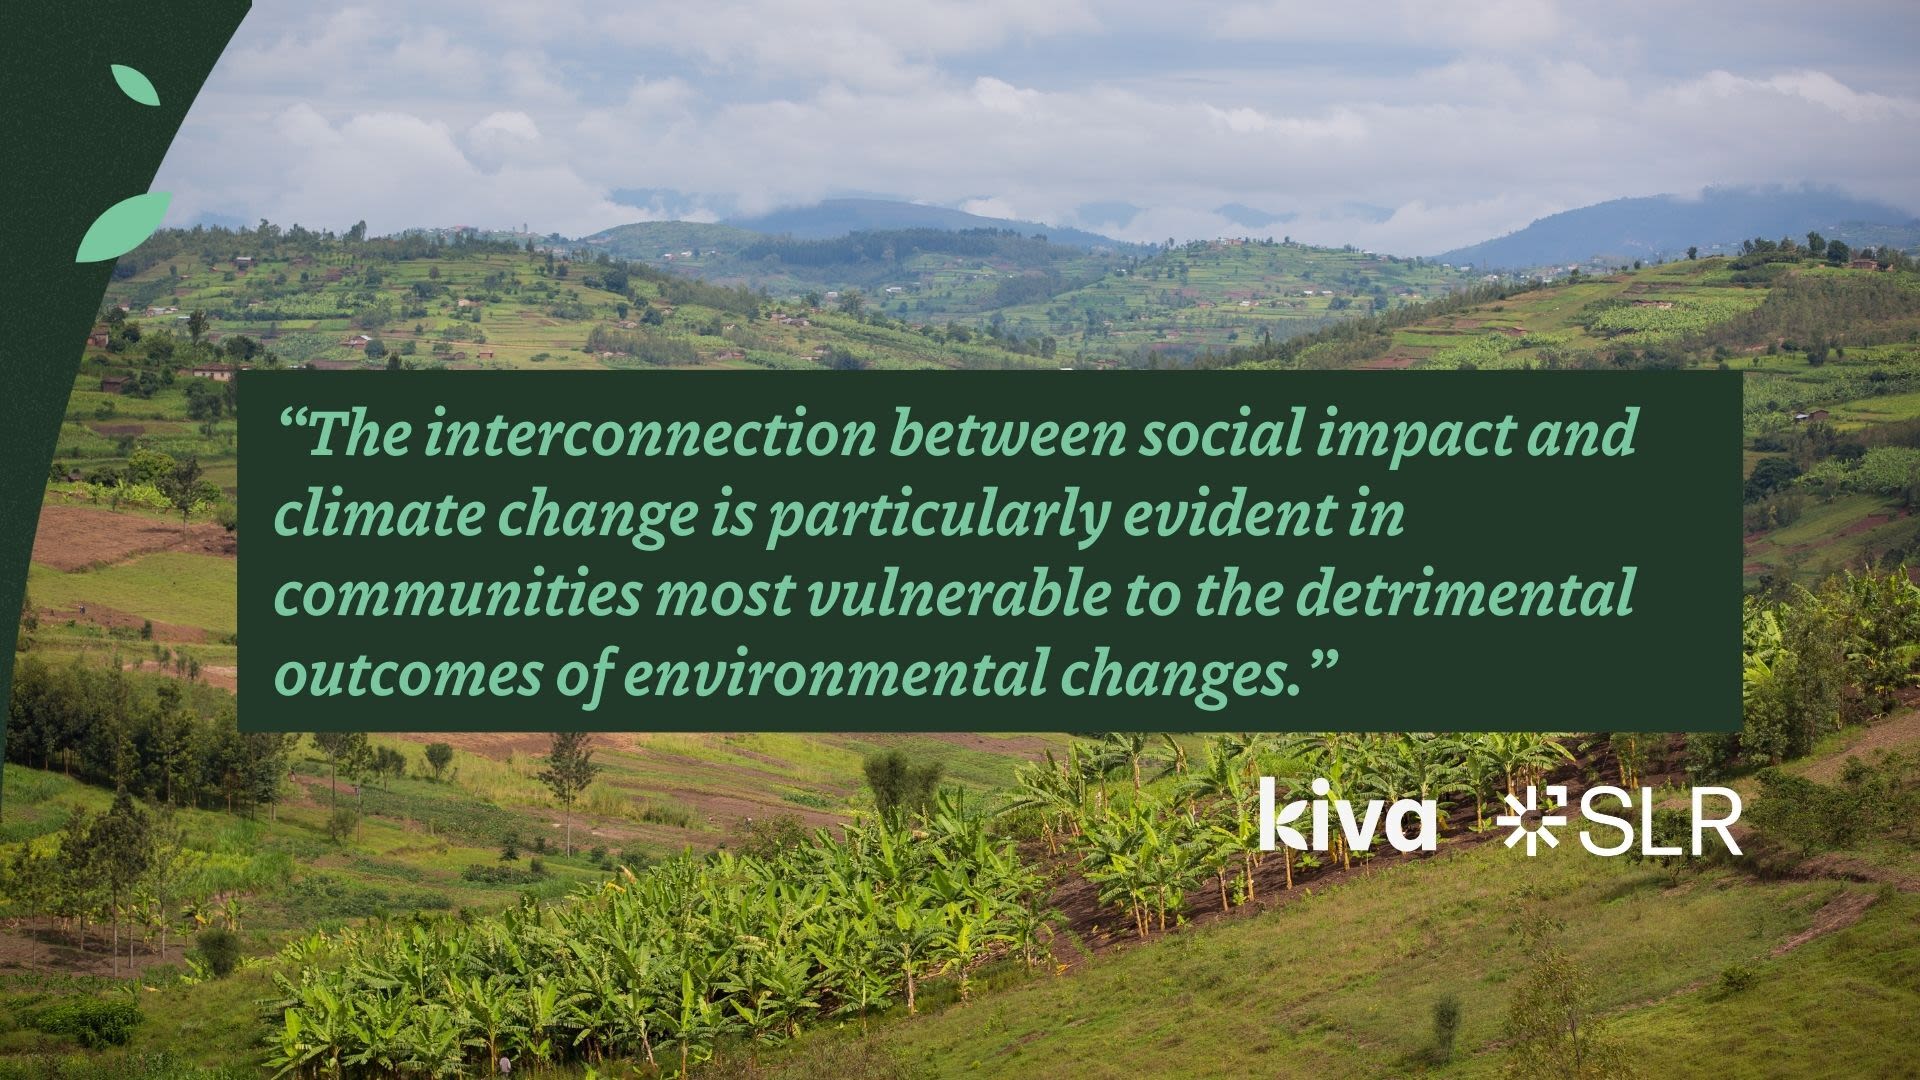 Quote image: "The interconnection between social impact and climate change is particularly evident in communities most vulnerable to the detrimental outcomes of environmental changes."